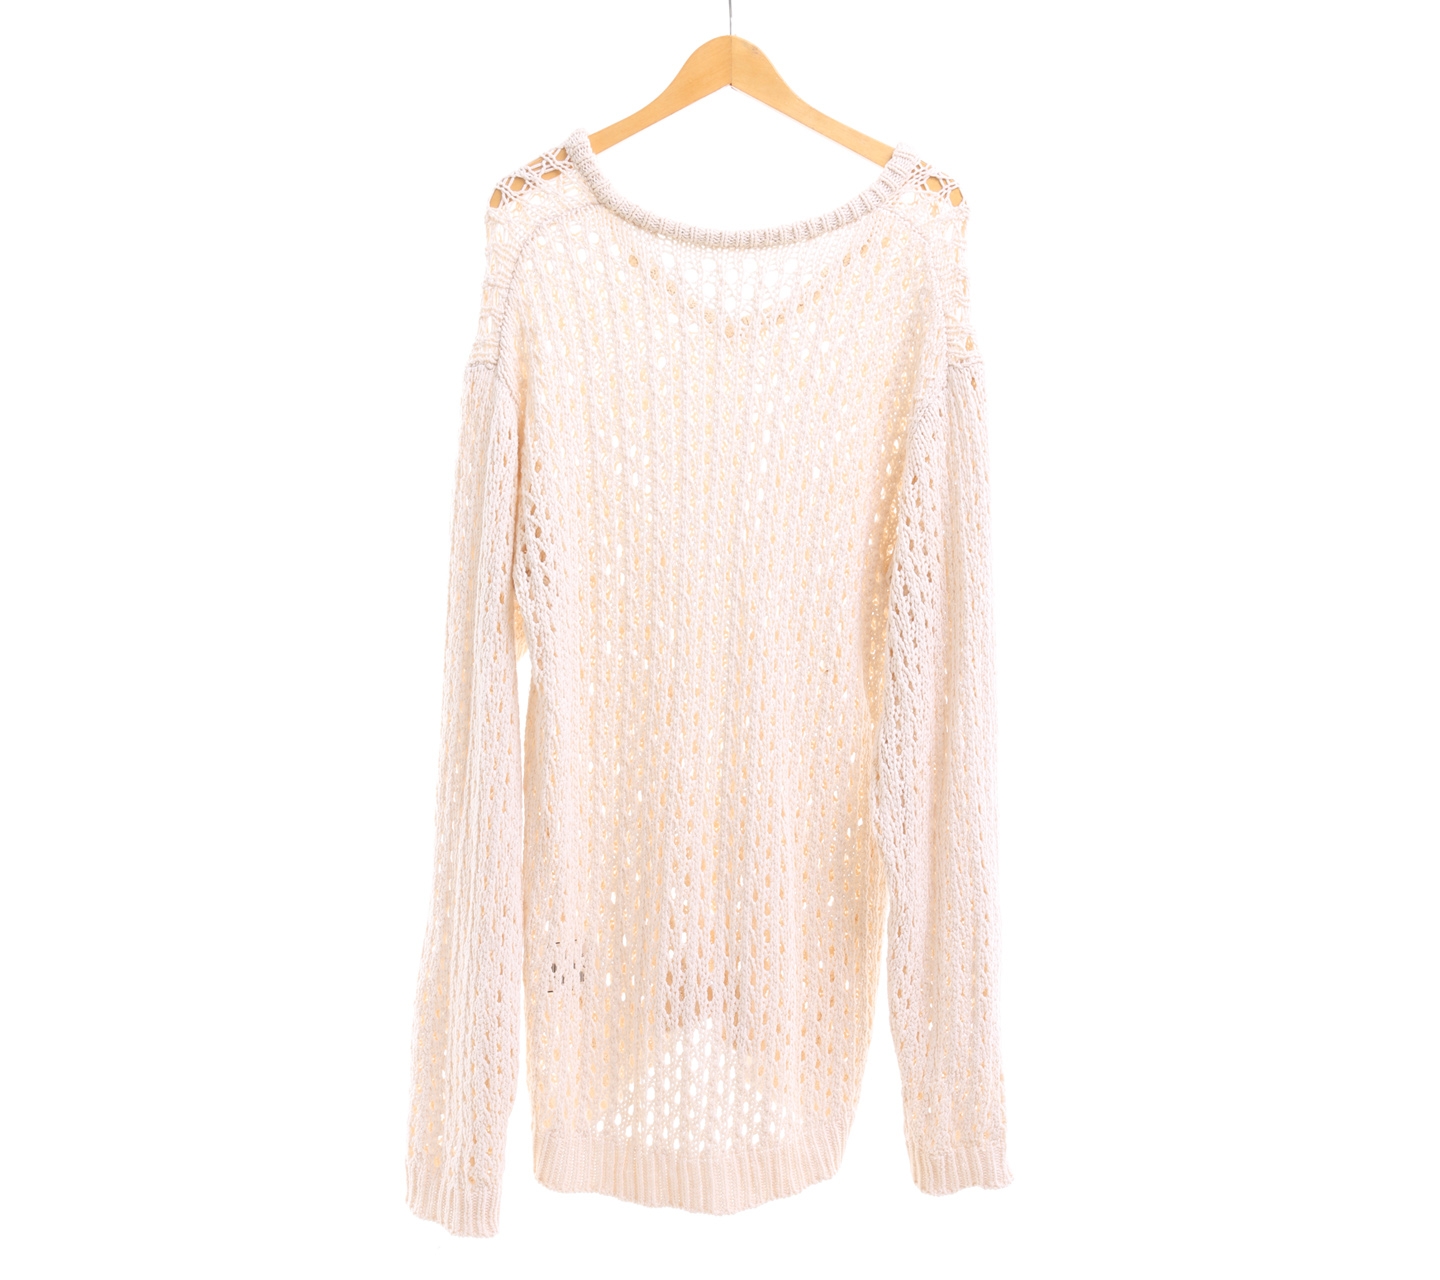 Private Collection Cream Knit Sweater